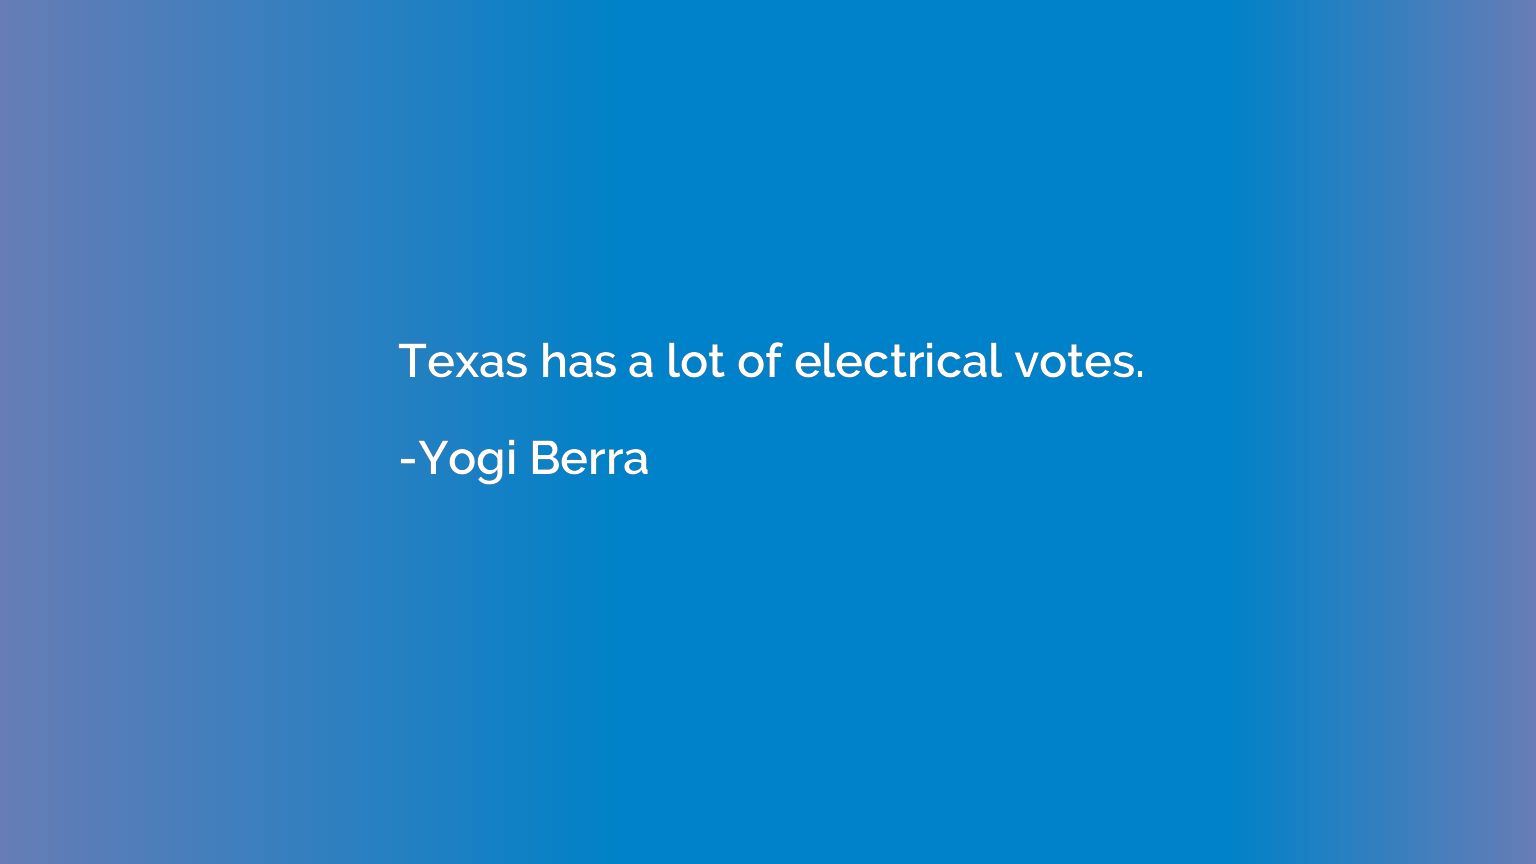 Texas has a lot of electrical votes.